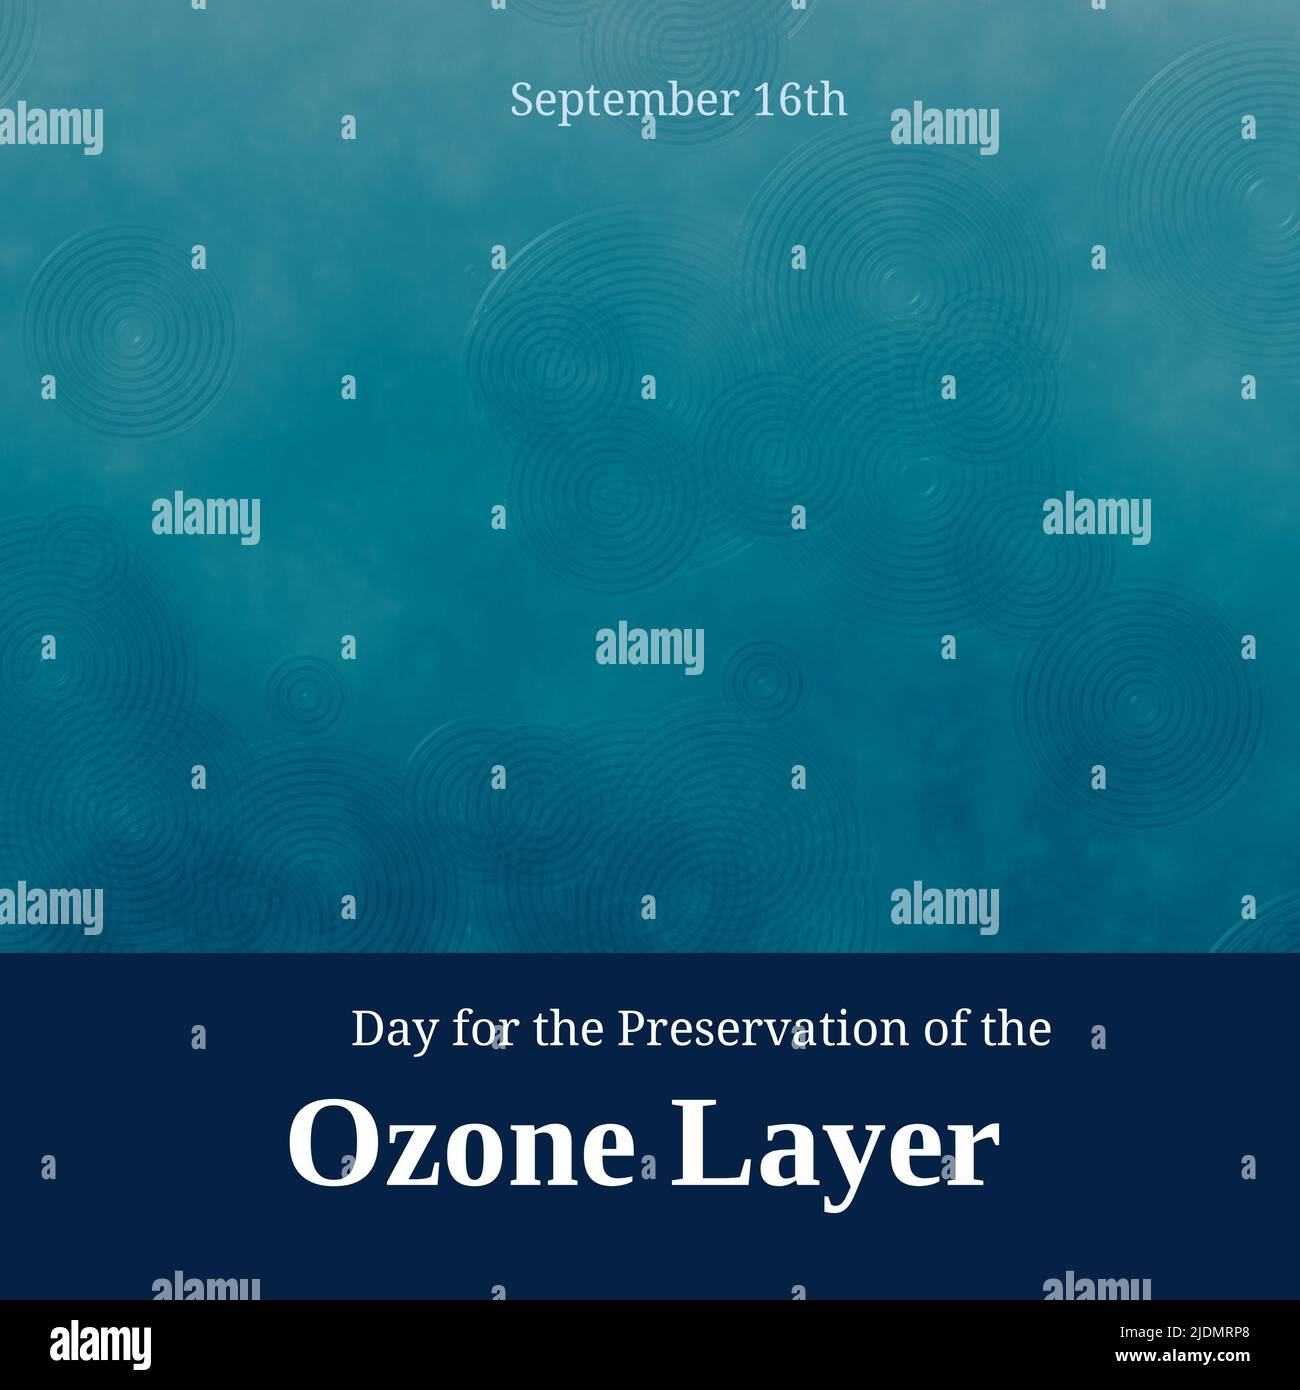 Illustration of day for preservation of ozone layer text with circular patterns on blue background Stock Photo